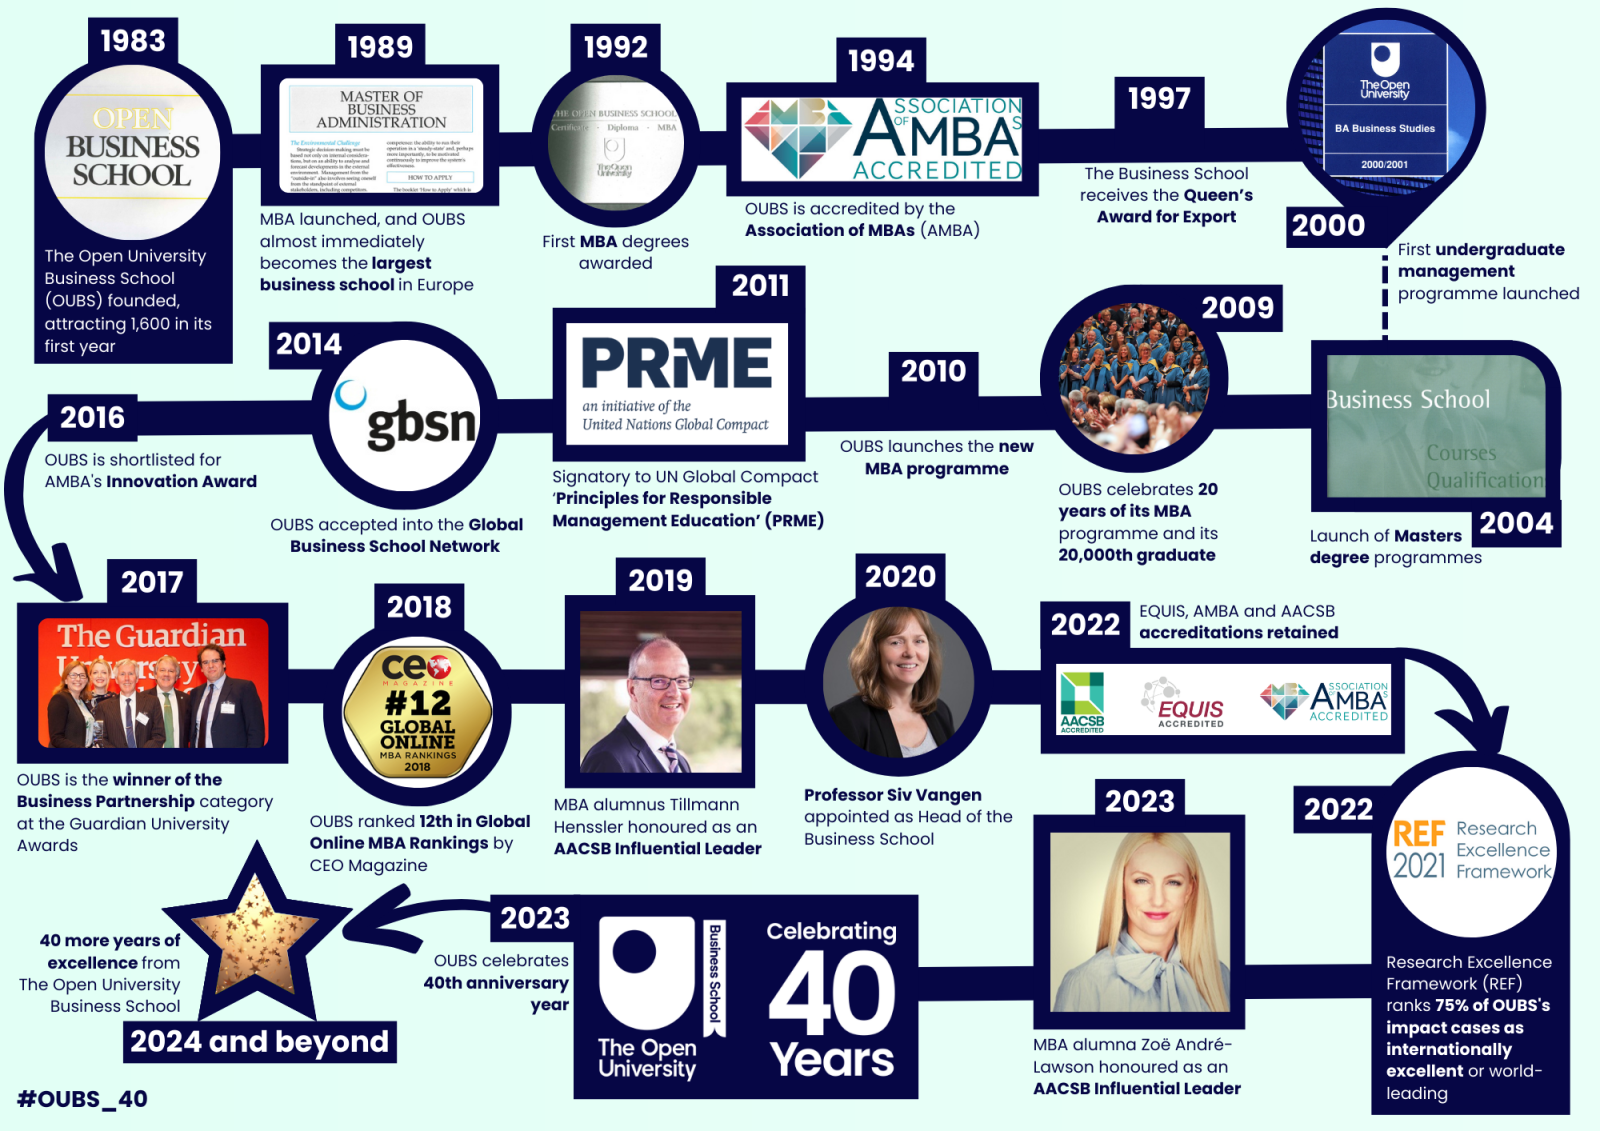 Infographic showing timeline, starting in 1983 The Open University Business School (OUBS) founded, attracting 1,600 students in its first year. Key dates include 1989: MBA launched, and OUBS almost immediately becomes the largest business school in Europe. 1992: First MBA degrees awarded. 1994:OUBS is accredited by the Association of MBAs (AMBA). 2011: Signatory to UN Global Compact 'Principles for Responsible Management Education' (PRME). 2016: OUBS is shortlisted for AMBA's Innovation Award. 2019: MBA alumnus Tillman Henssler honoured as an AACSB Influential Leader. 2022: Research Excellence Framework (REF) ranks 75% of OUBS's impact cases as internationally excellent or world-leading. 2023: MBA alumna Zoe Andre-Lawson honoured as an AACSB Influential Leader. The #OUBS_40 hashtag is shown in the bottom left-hand corner.